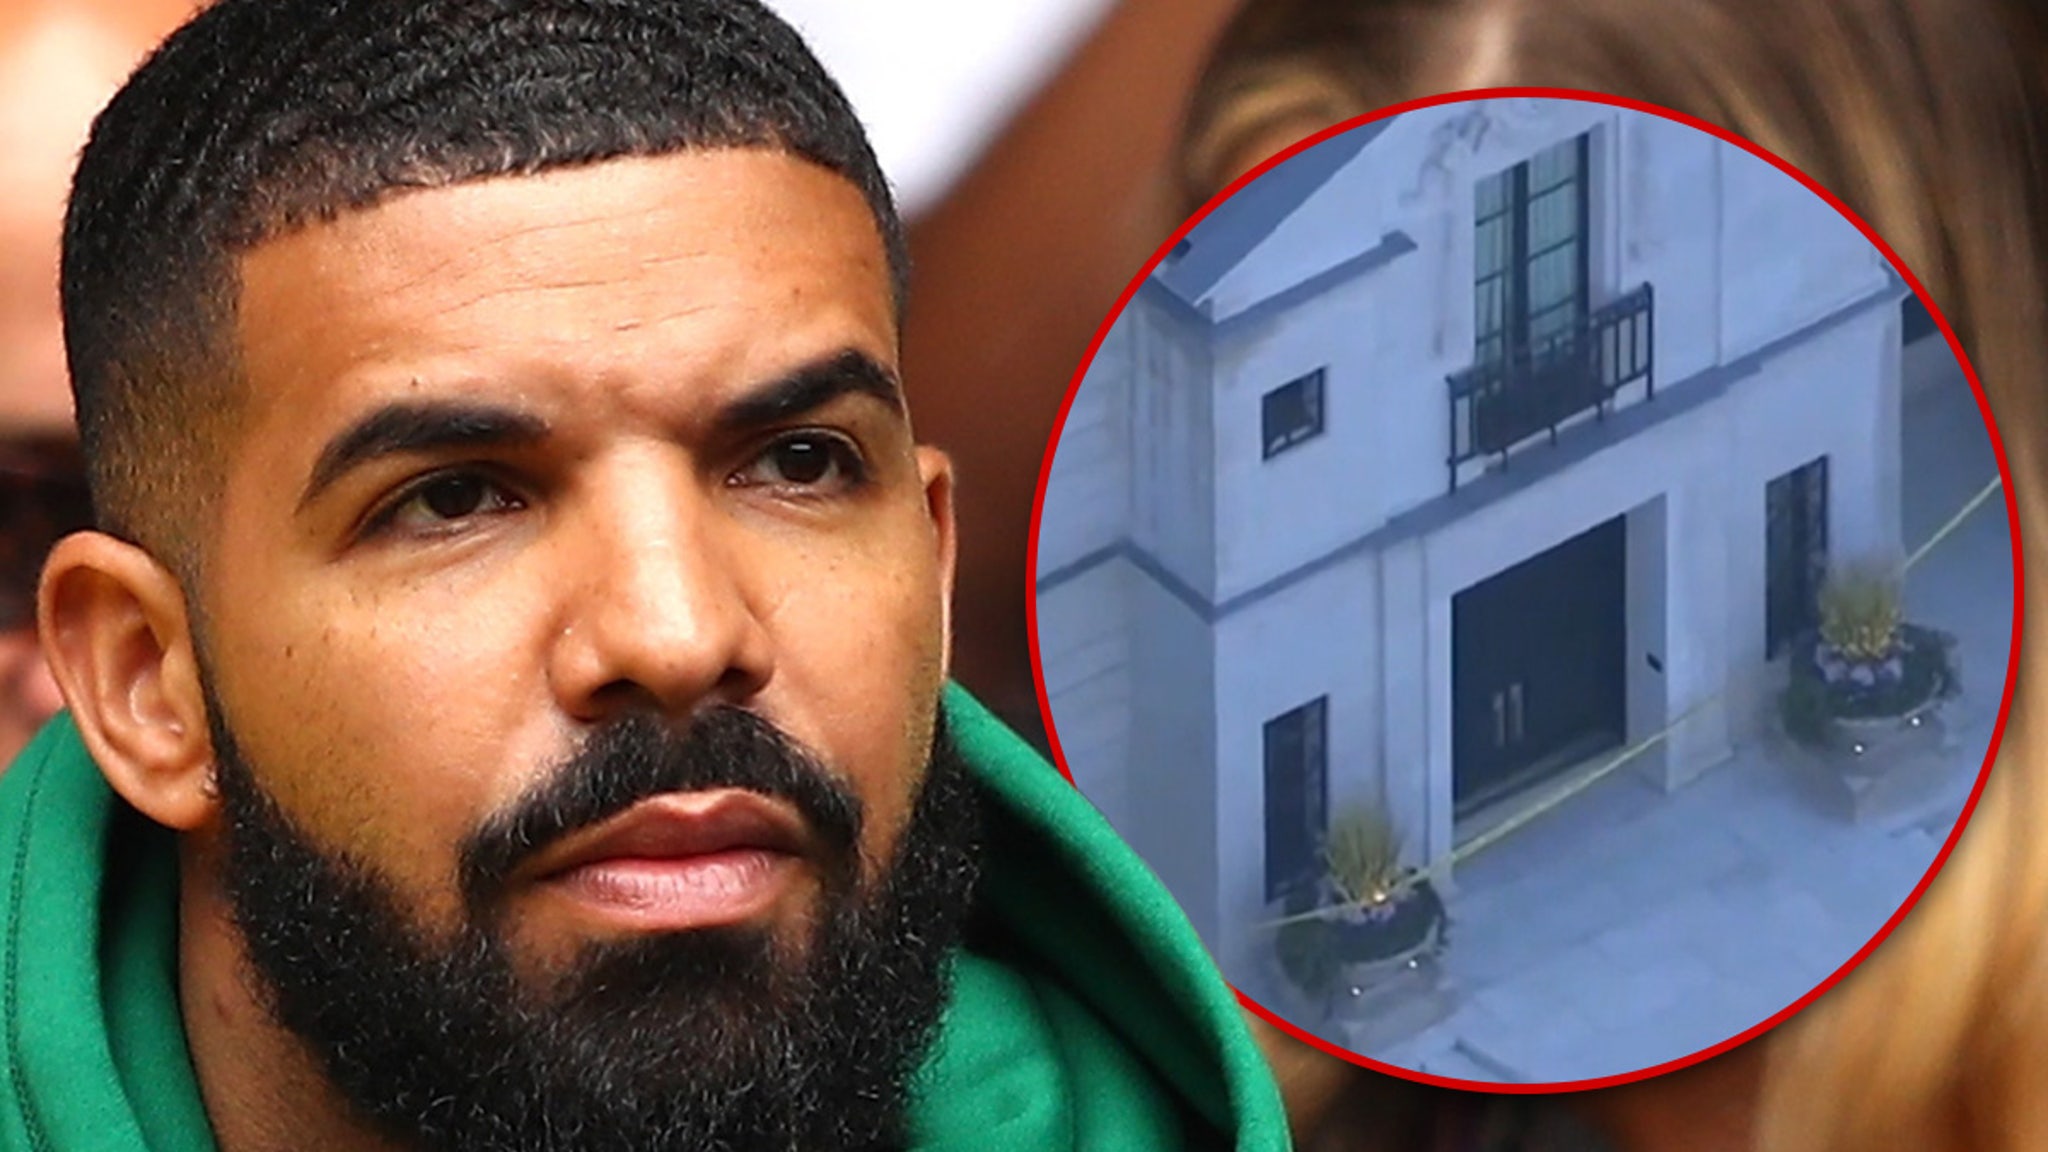 Drake's Toronto Home Visited By Alleged Attempted Trespasser, Intercepted